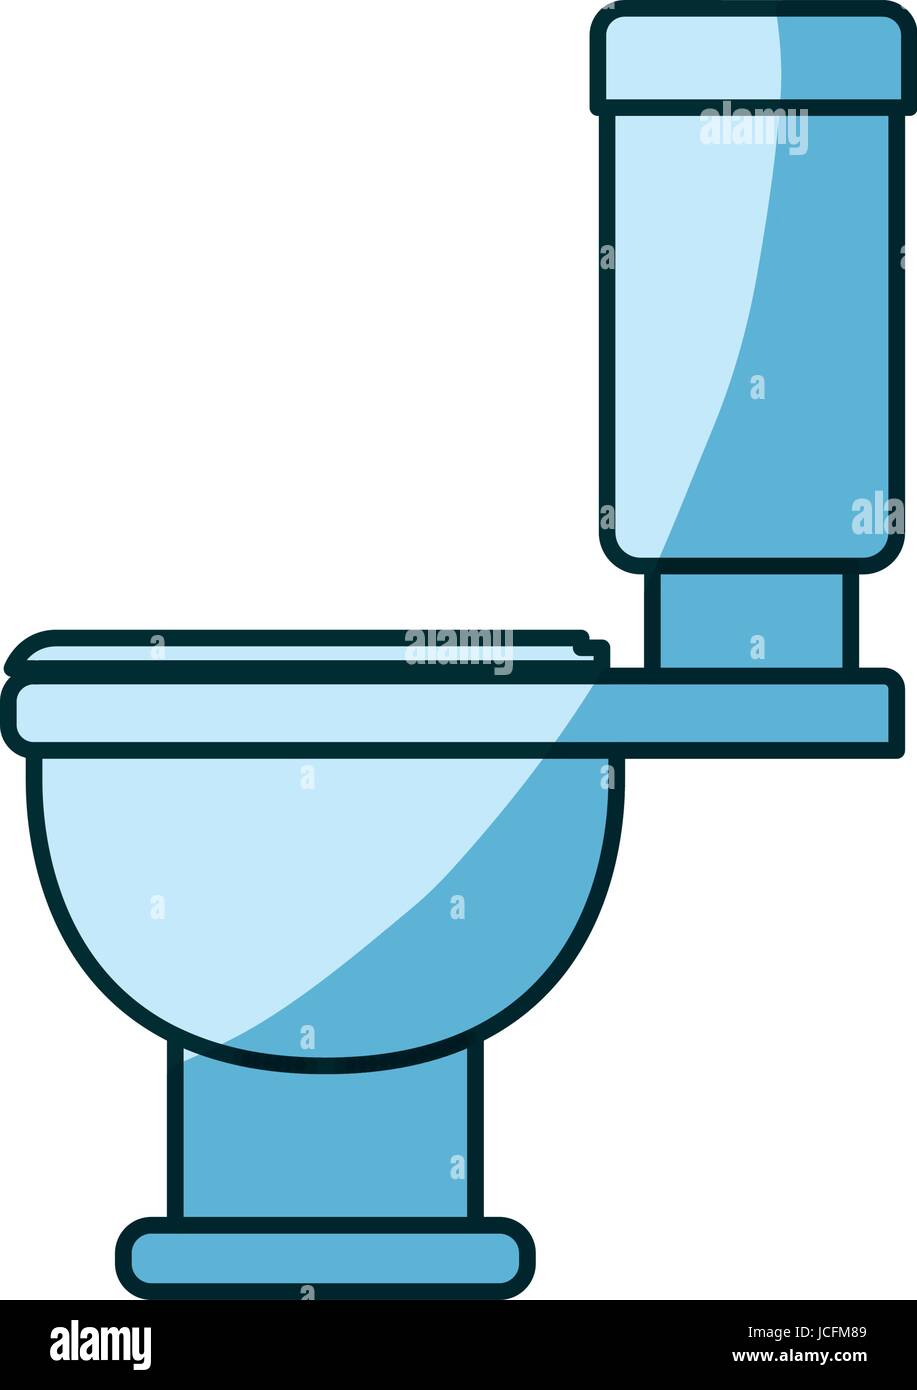 blue shading silhouette of toilet icon side view Stock Vector